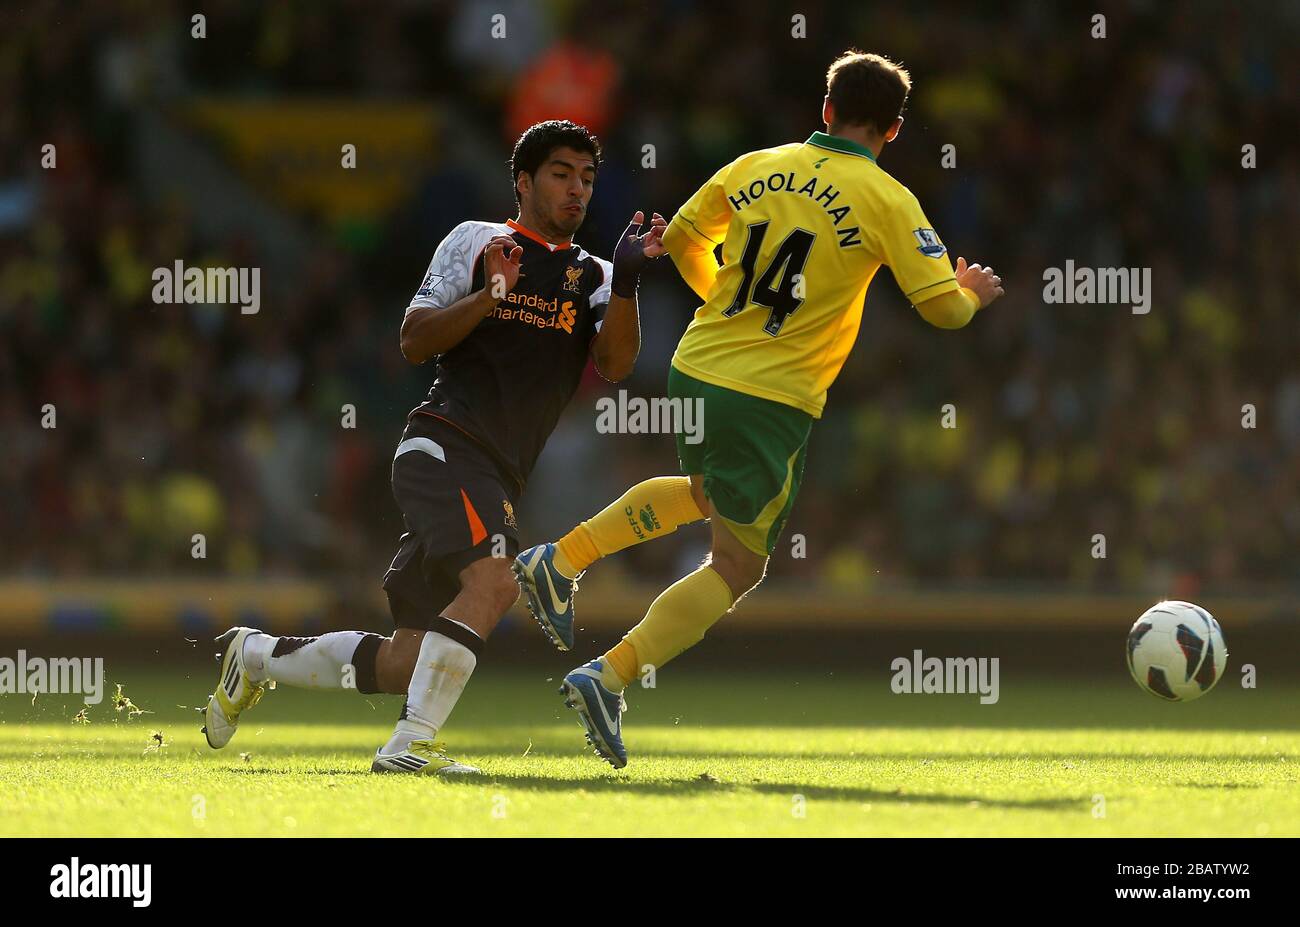 Liverpool's Luis Suarez and Norwich City's Wes Hoolahan compete for the ball Stock Photo